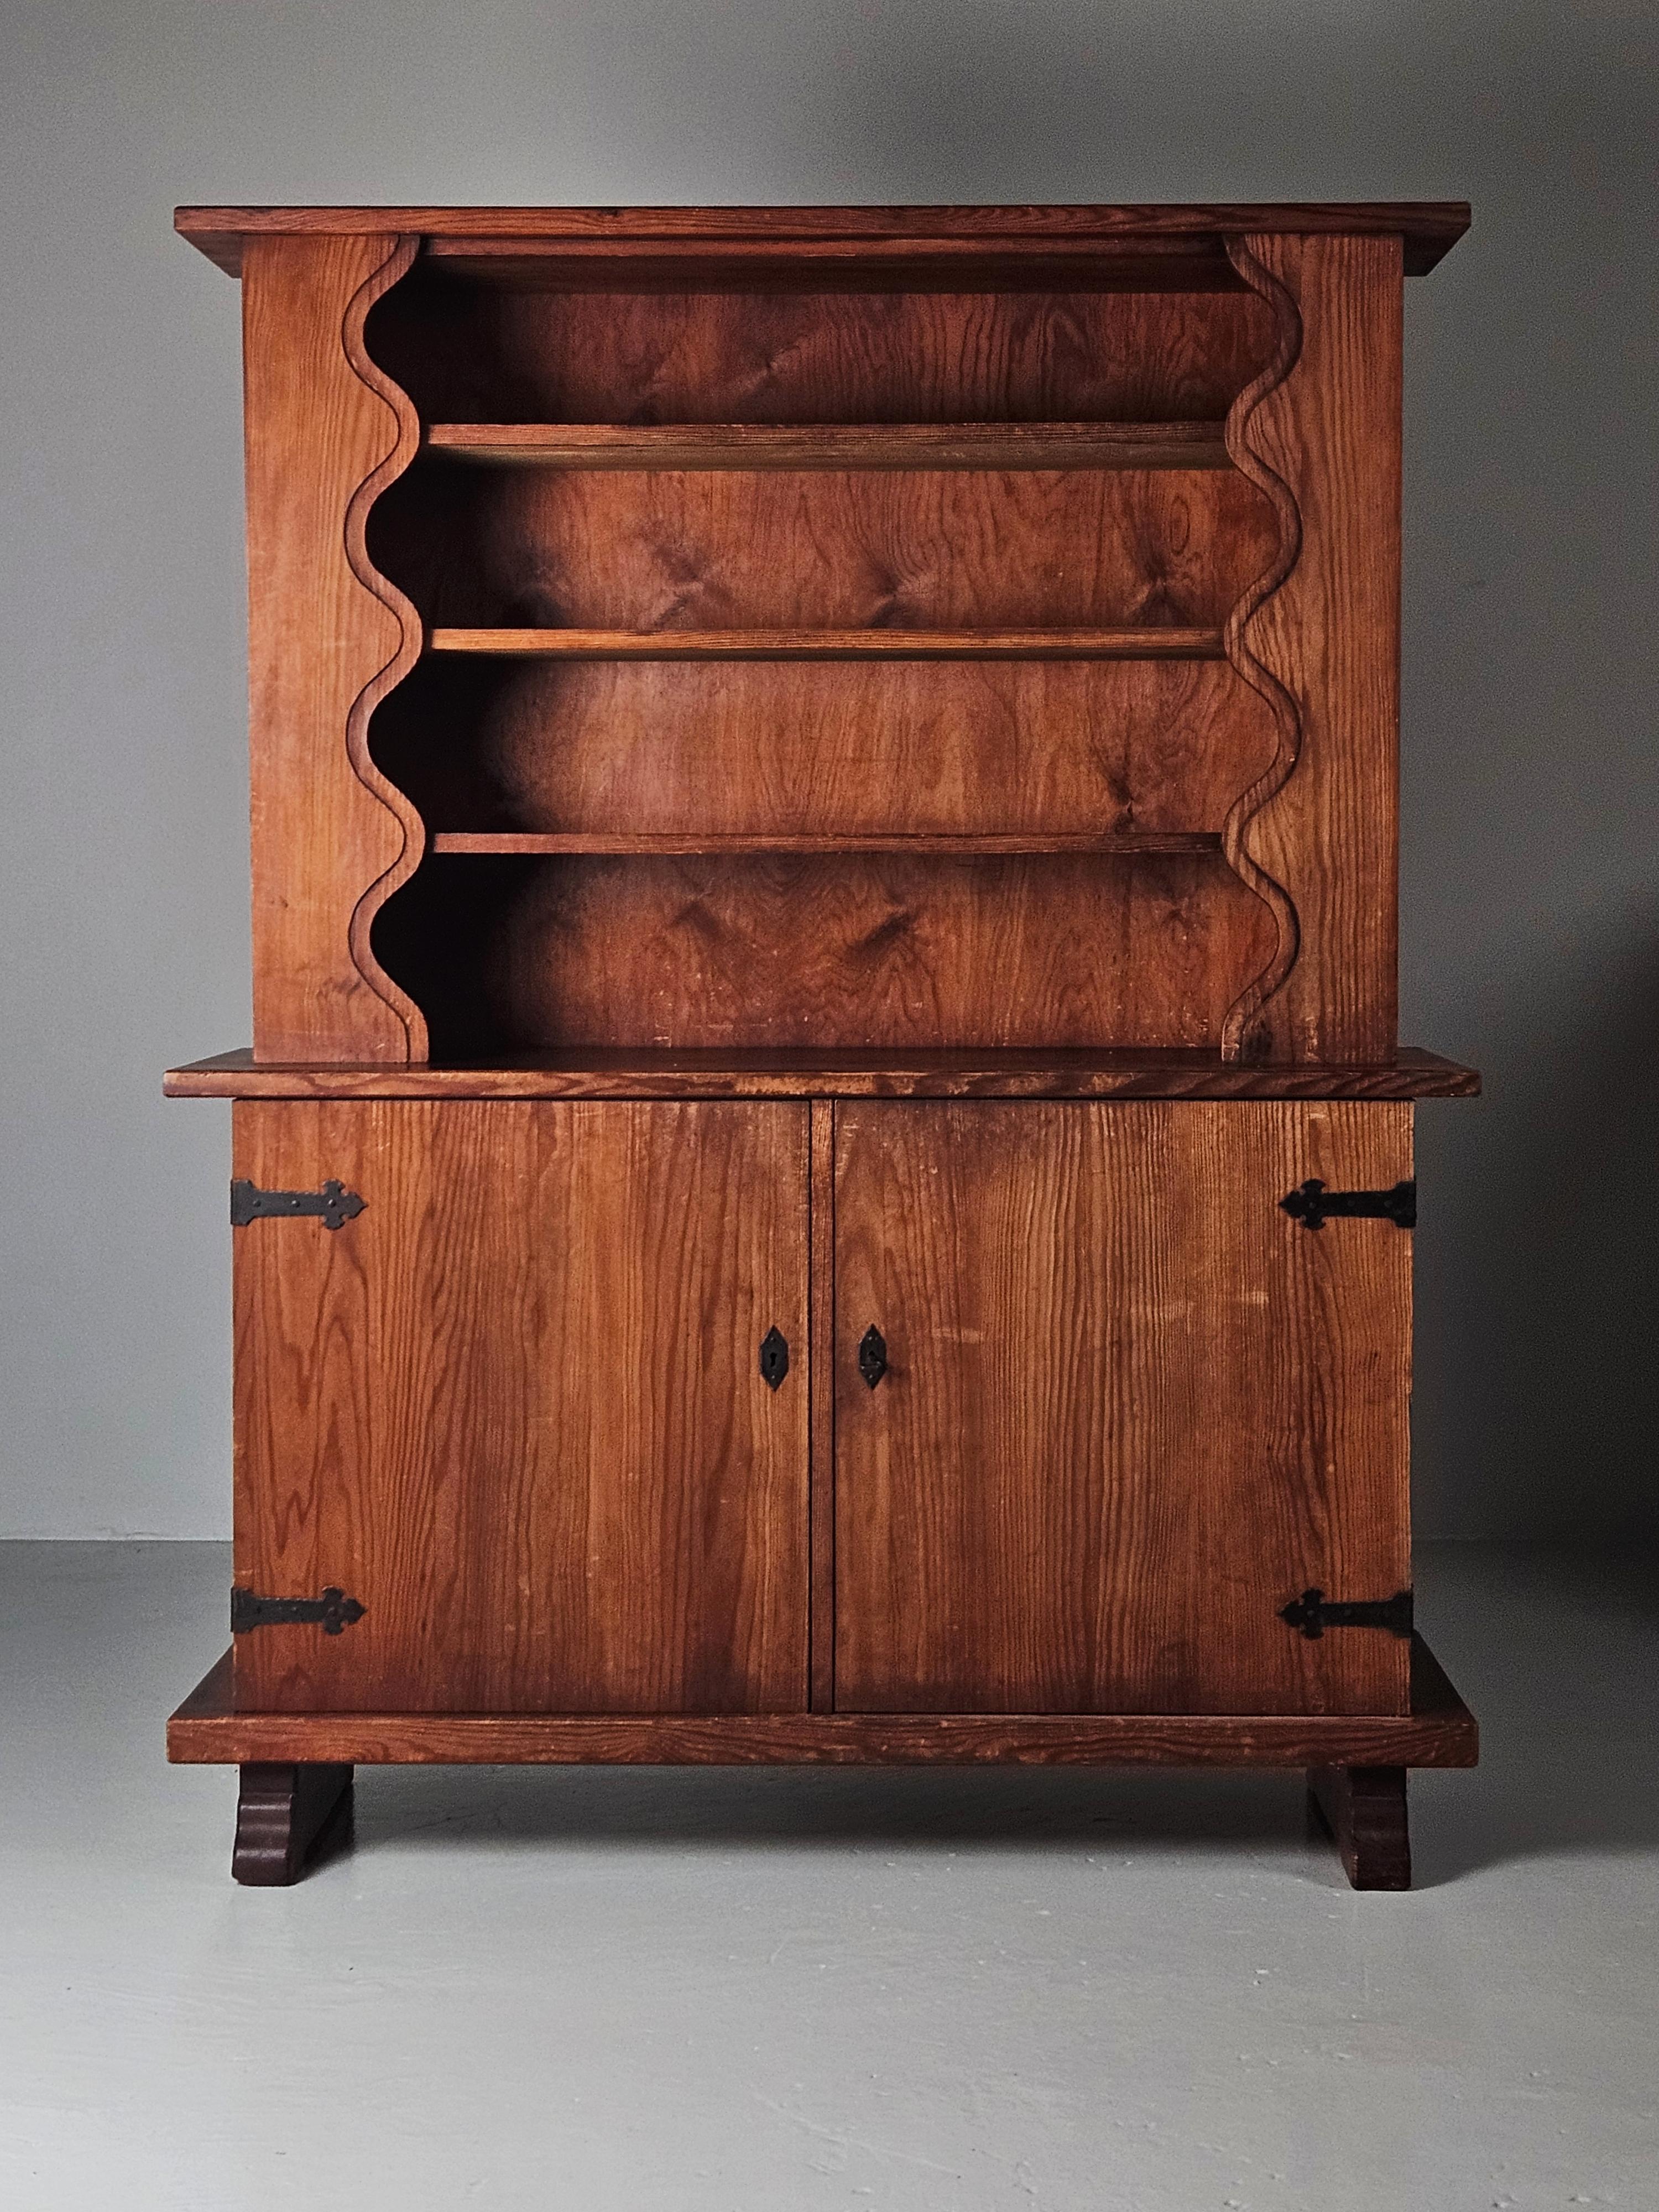 Very rare cabinet produced in Sweden, 1940s. 

Made in solid pine with elements of iron. 

The wavy form of the top shelf as well as the legs of the cabinet makes you think of Axel Einar Hjorts sports cabin furniture produced by Nordiska Kompaniet